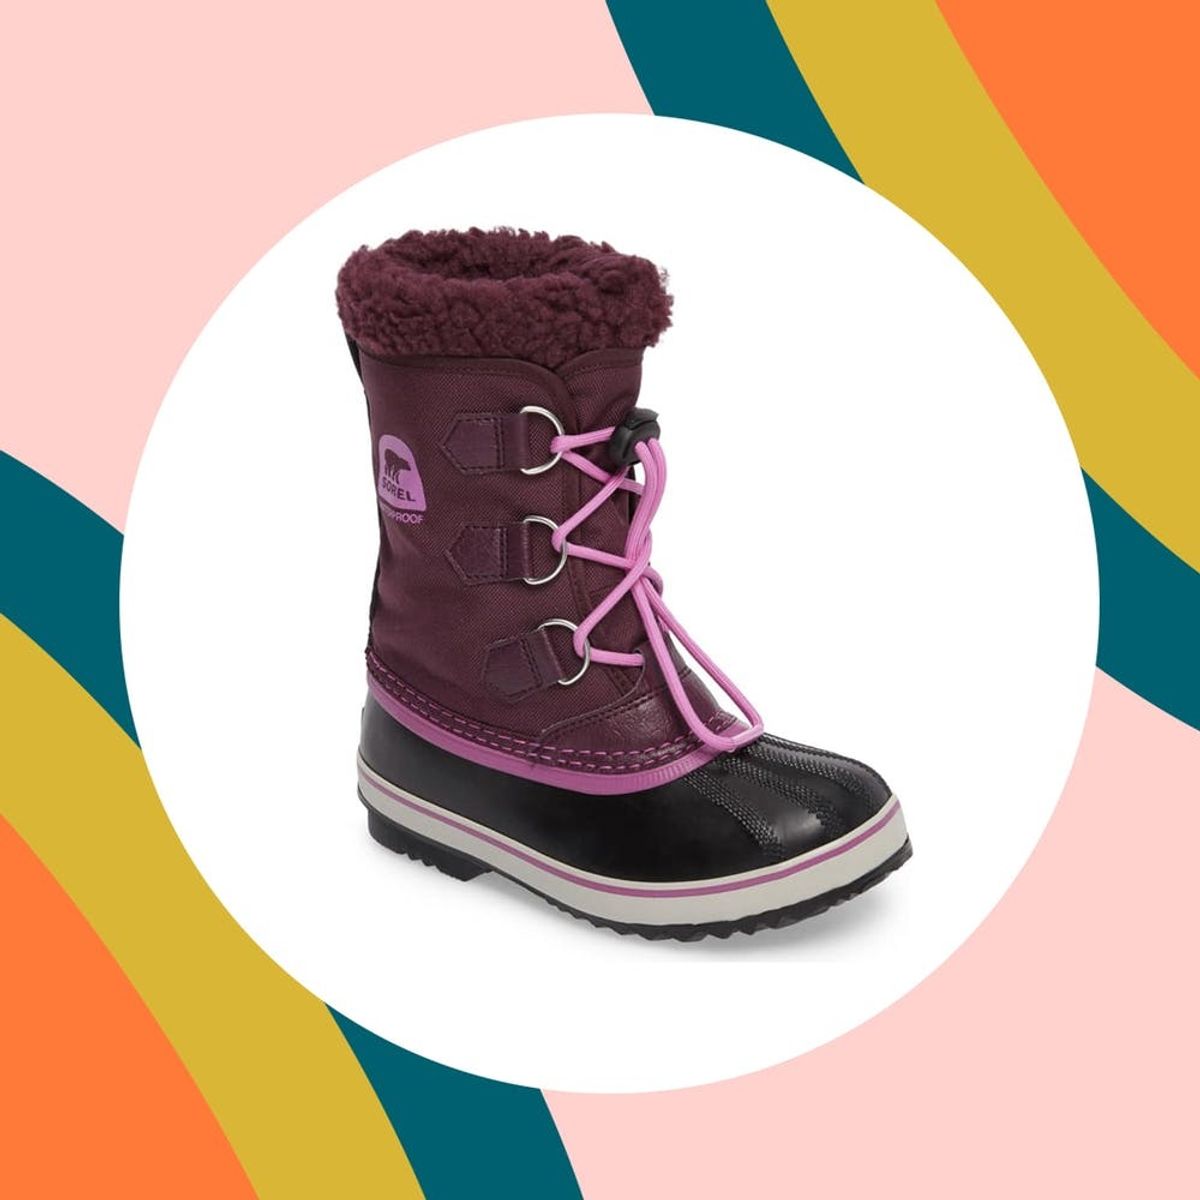 10 Toddler-Friendly Winter Boots